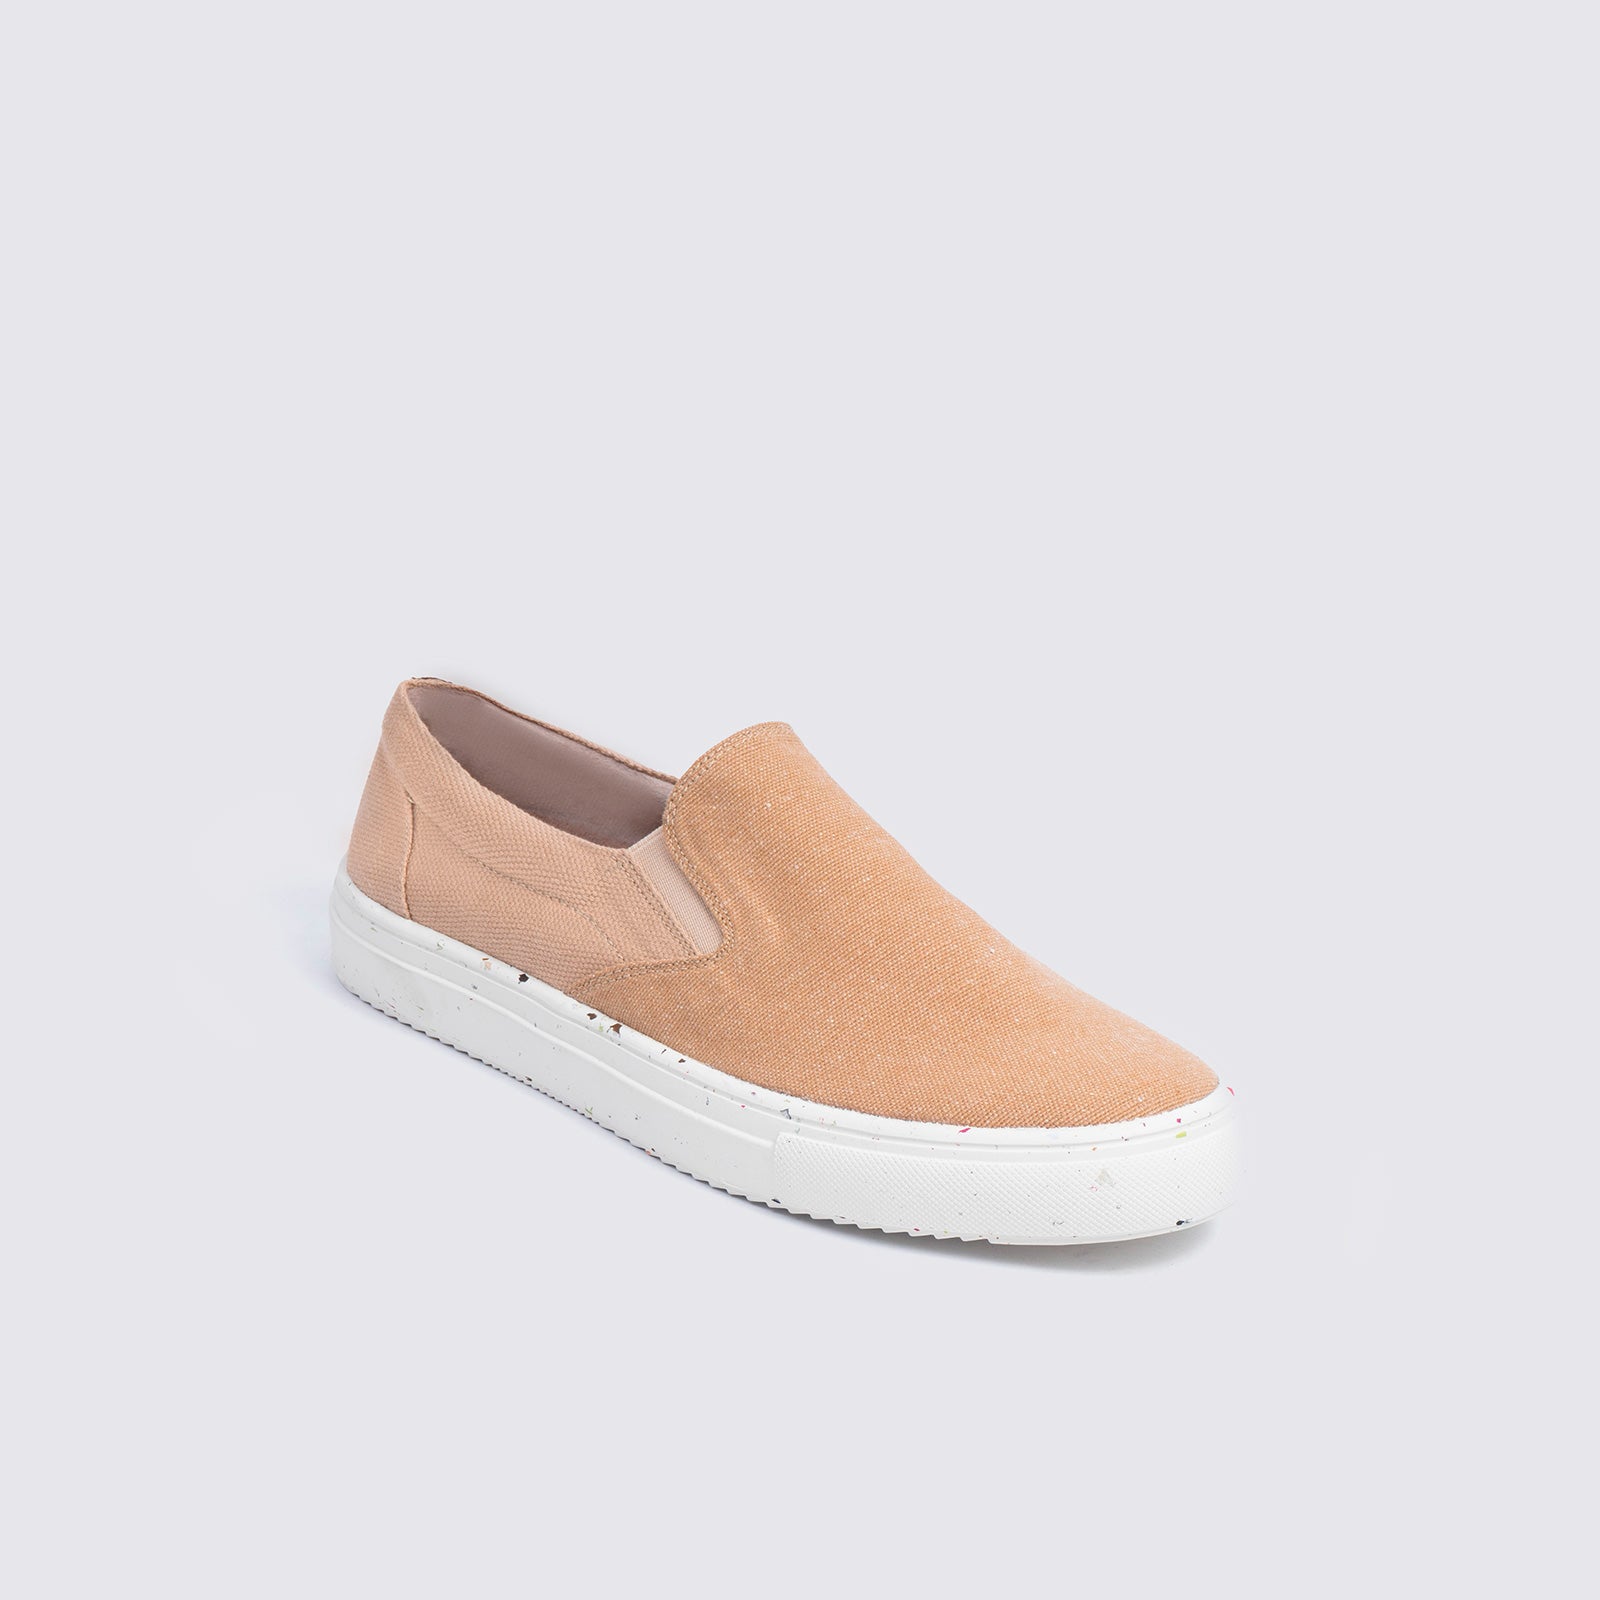 Slip On Camel Simples - Hombre